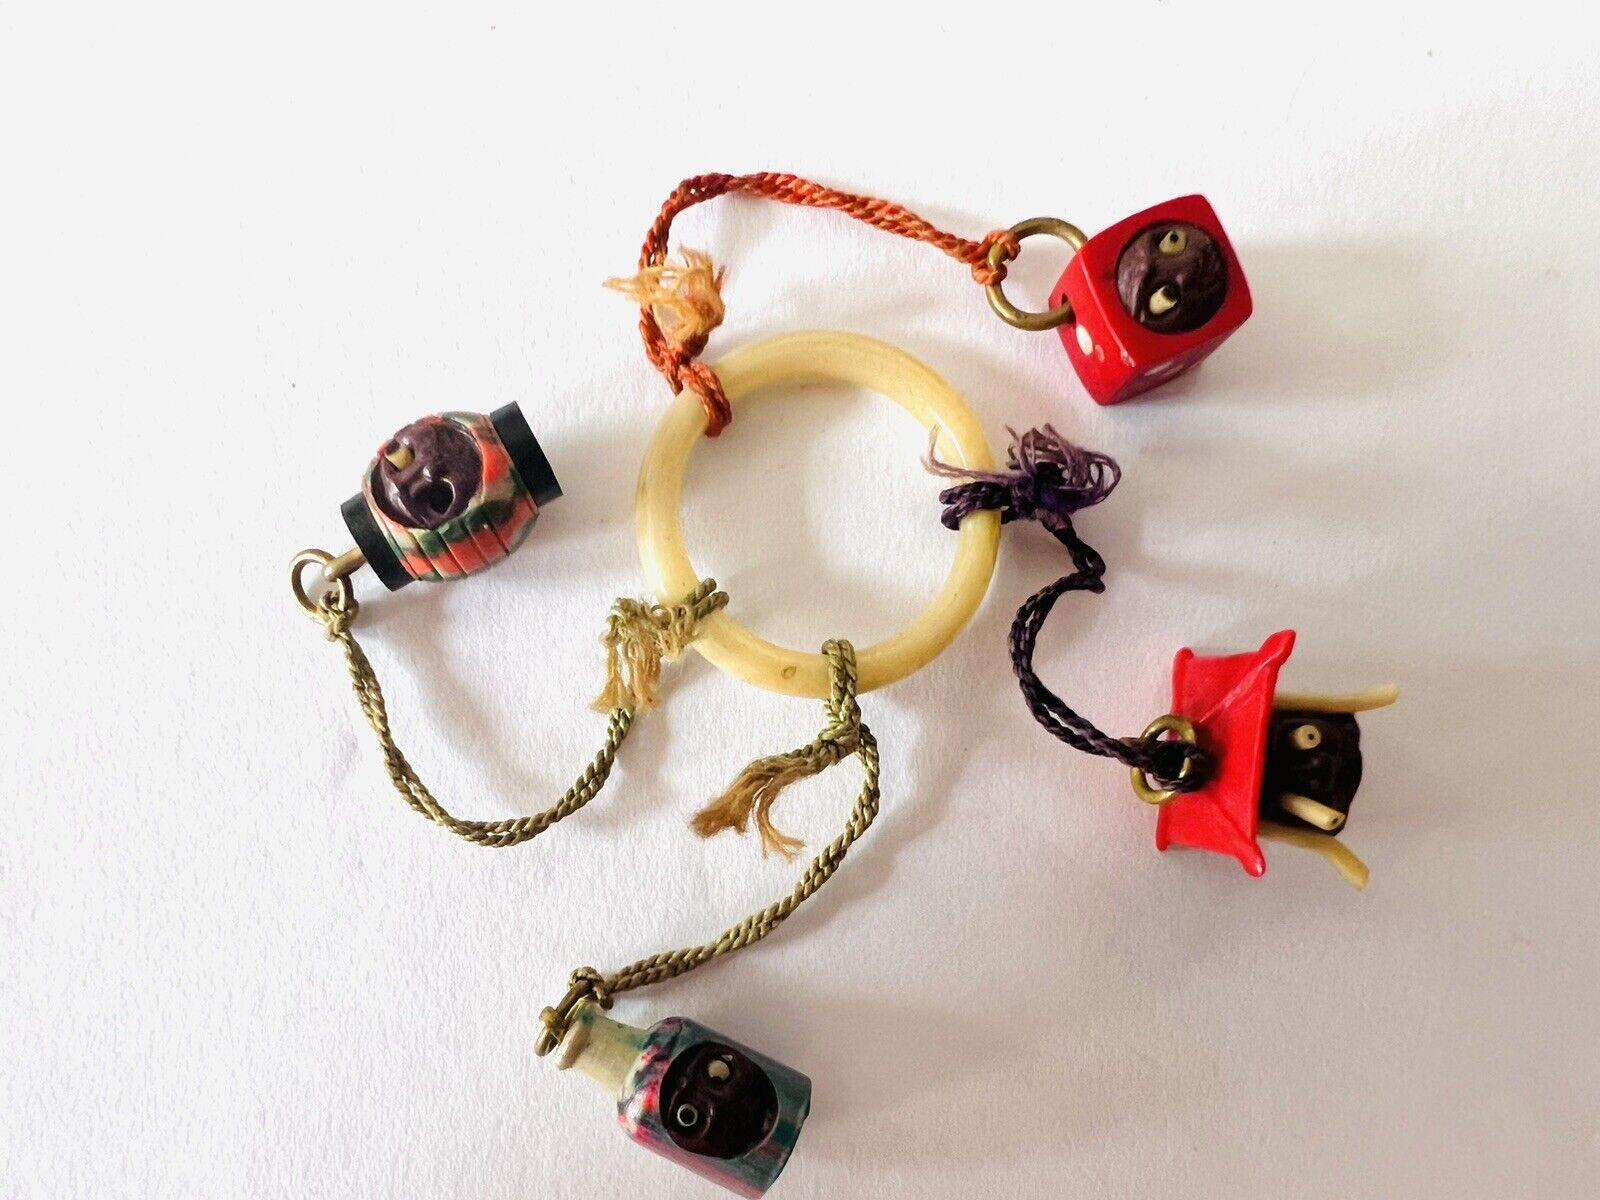 Lot Of 4 Ultra Rare Kobe Japan Celluloid Charms Pop Out Eyes 1920-1930 With Ring